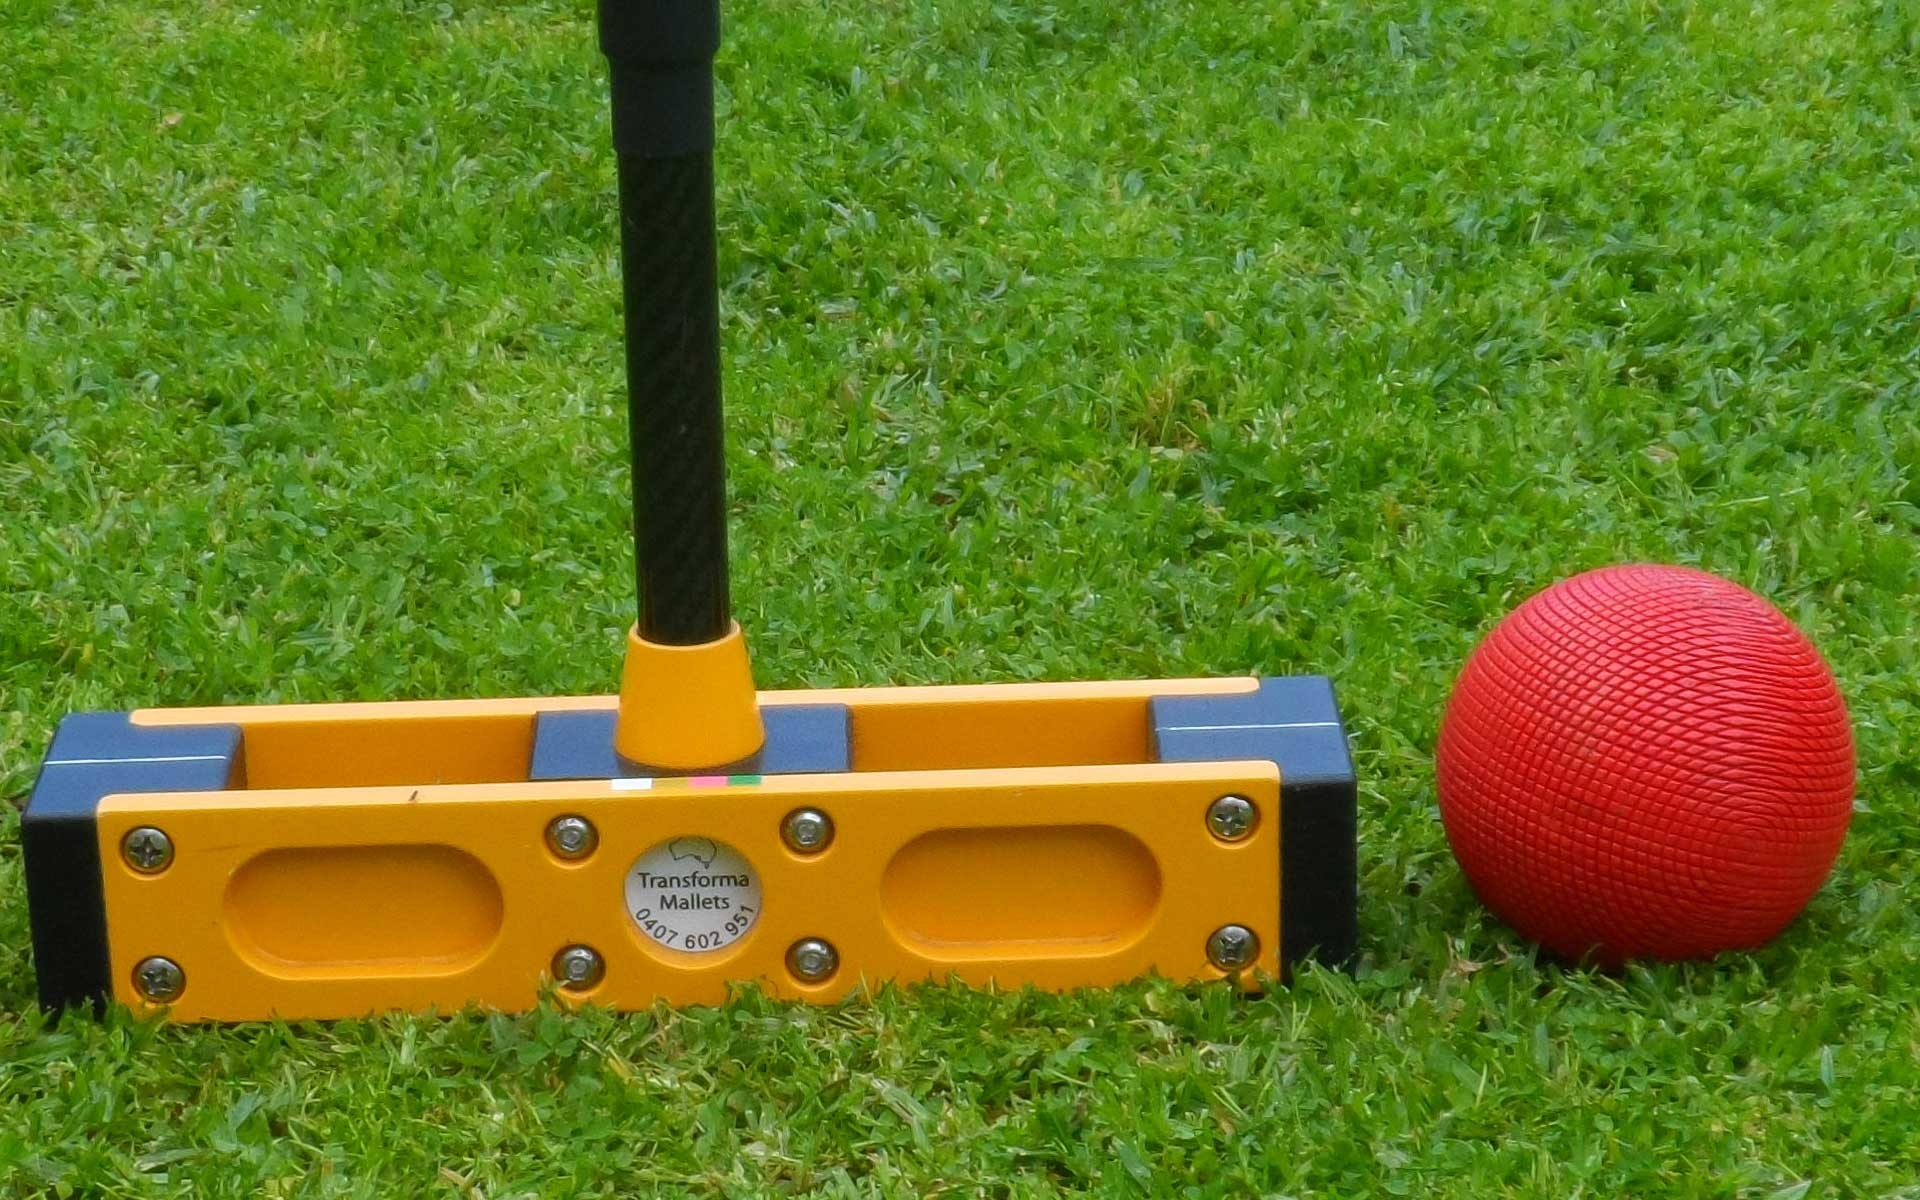 Croquet: Popular outdoor game played on a lawn or court with long-handled mallets. 1920x1200 HD Wallpaper.